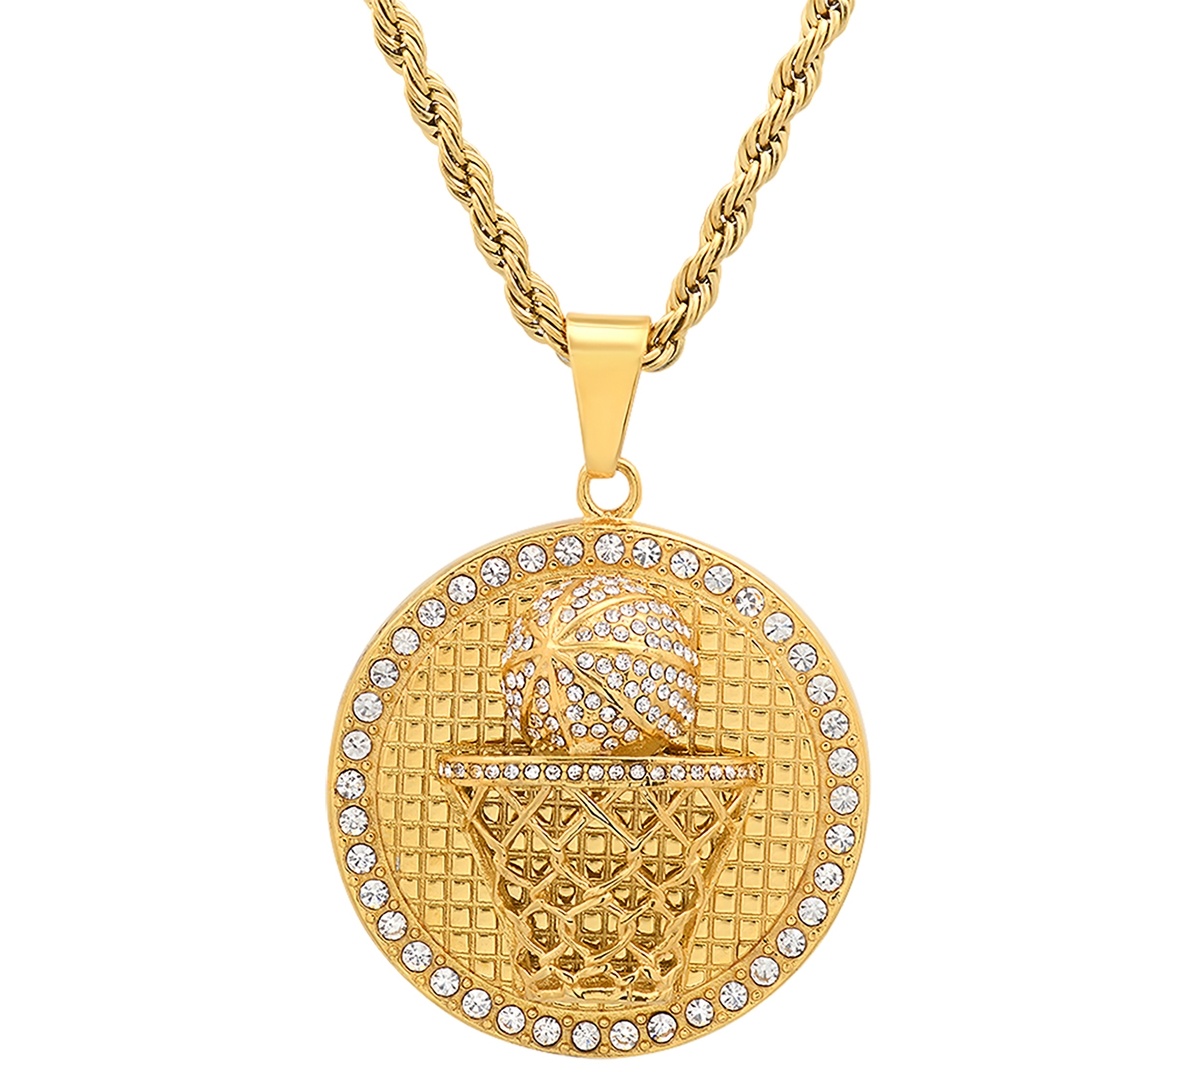 Shop Steeltime Men's 18k Gold-plated Stainless Steel Simulated Diamond Basketball 24" Pendant Necklace